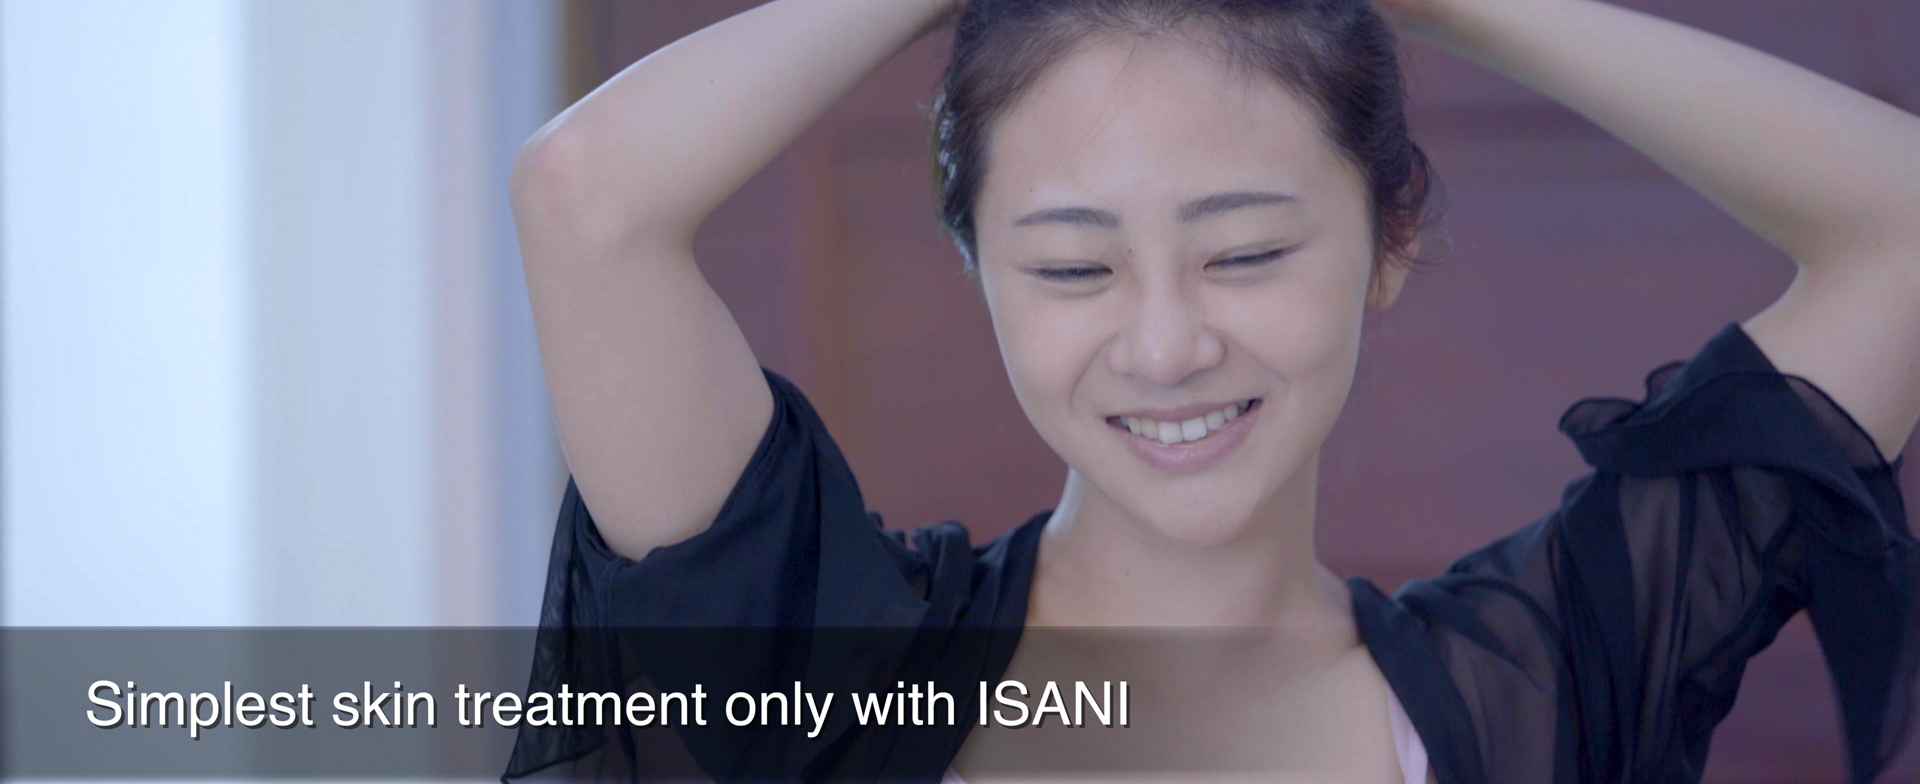 ISANI- Simplest skin treatment only with ISANI